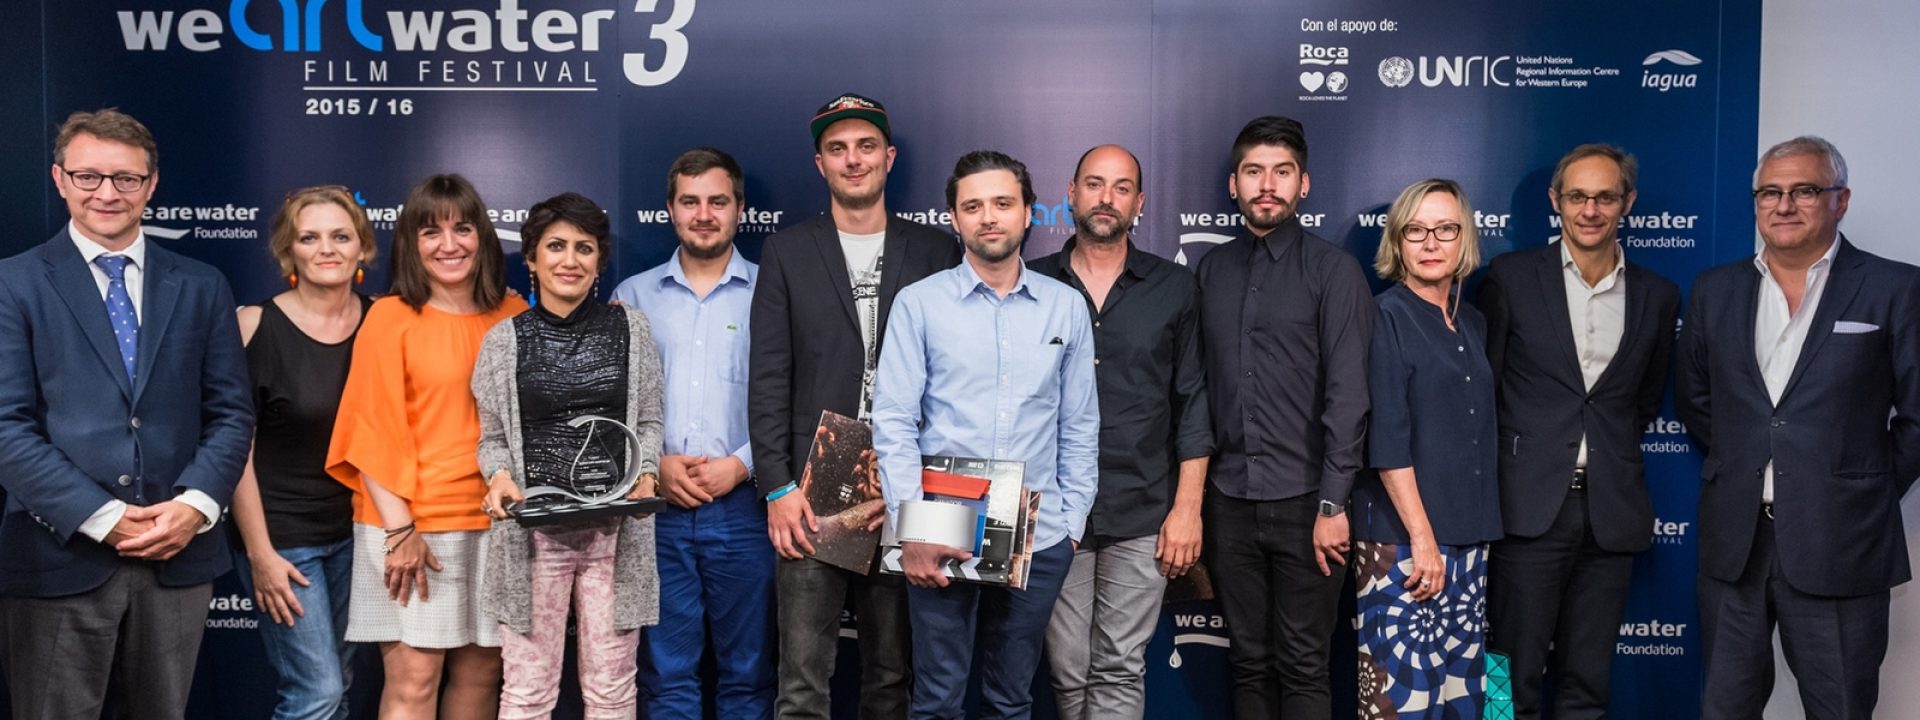 Iran, Russia, Cameroon and Bangladesh, winners of the We Art Water Film Festival 3